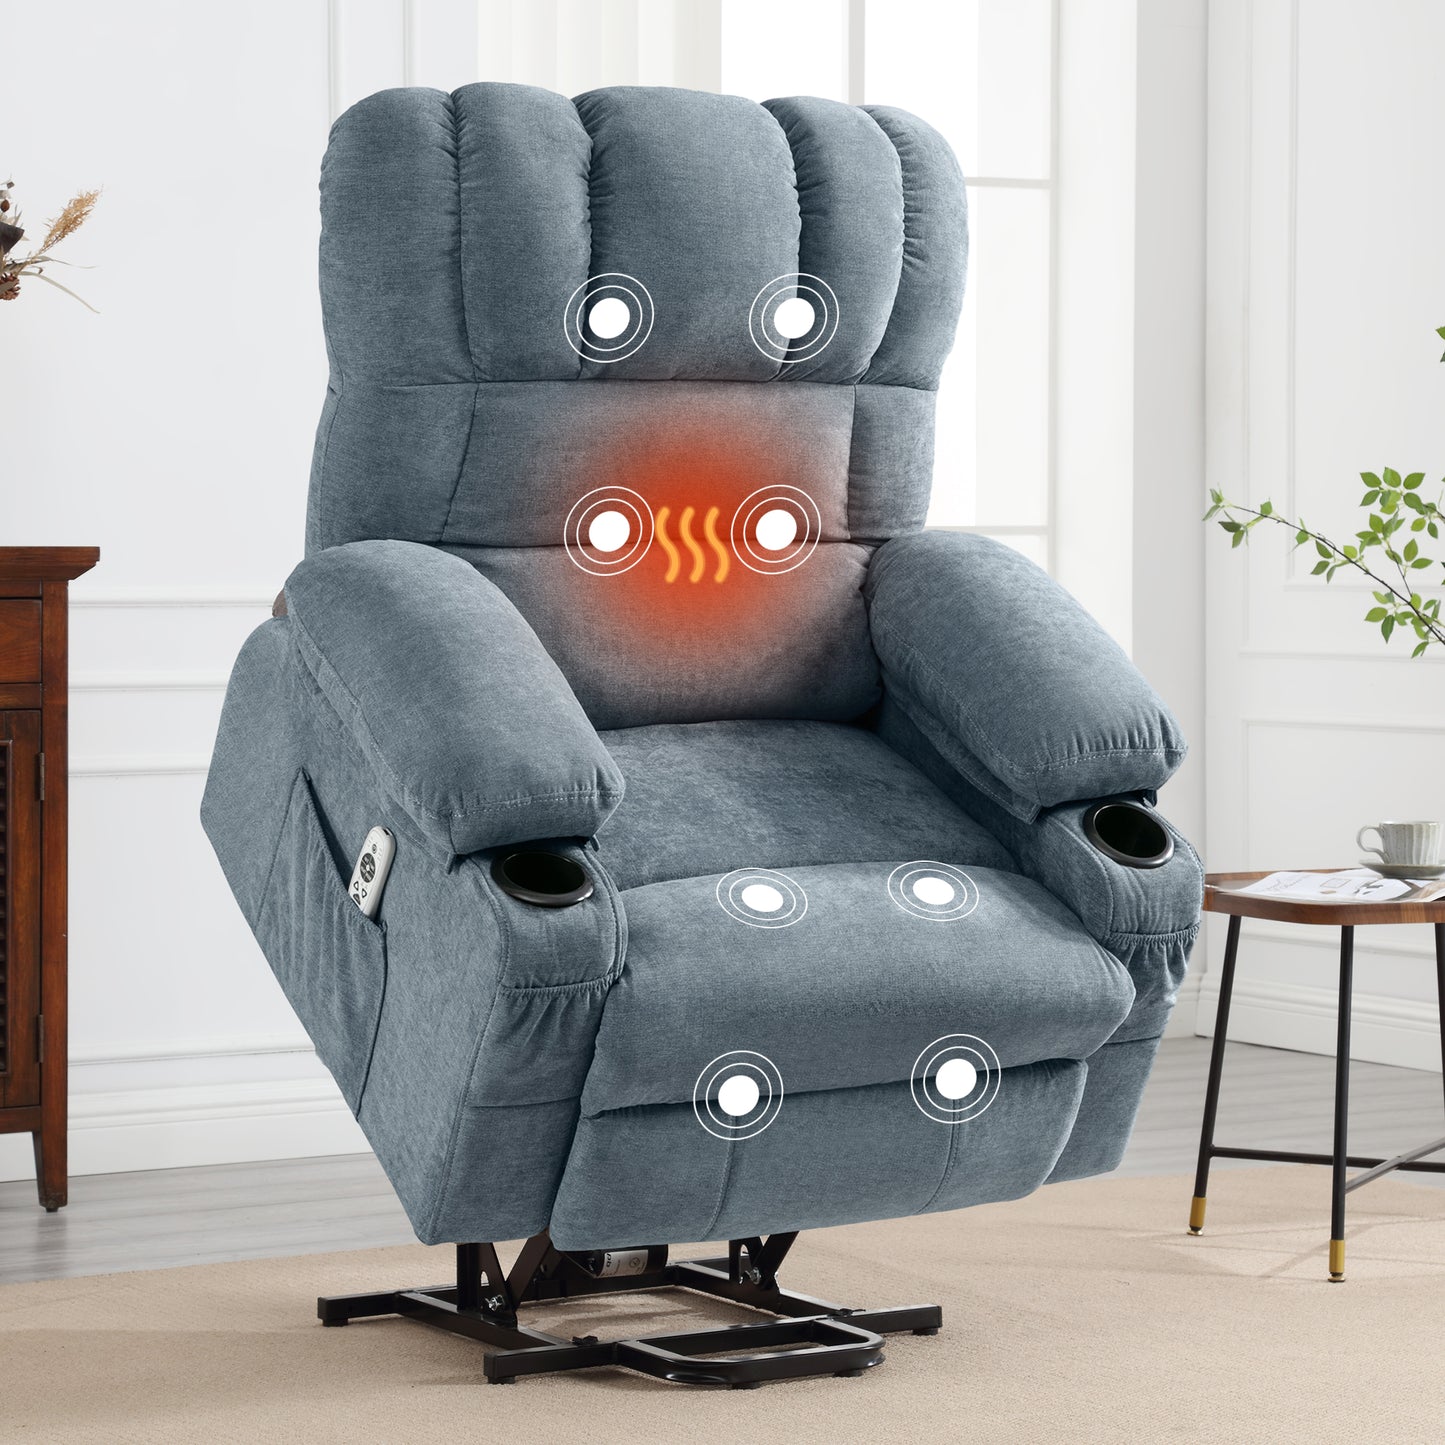 HSUNNS Power Lift Recliner Chair with Heat and Vibration Massage, Fabric Elderly Oversized Reclining Sofa with USB Charge Port, Cup Holders and Side Pockets for Bedroom Home Theater, Blue